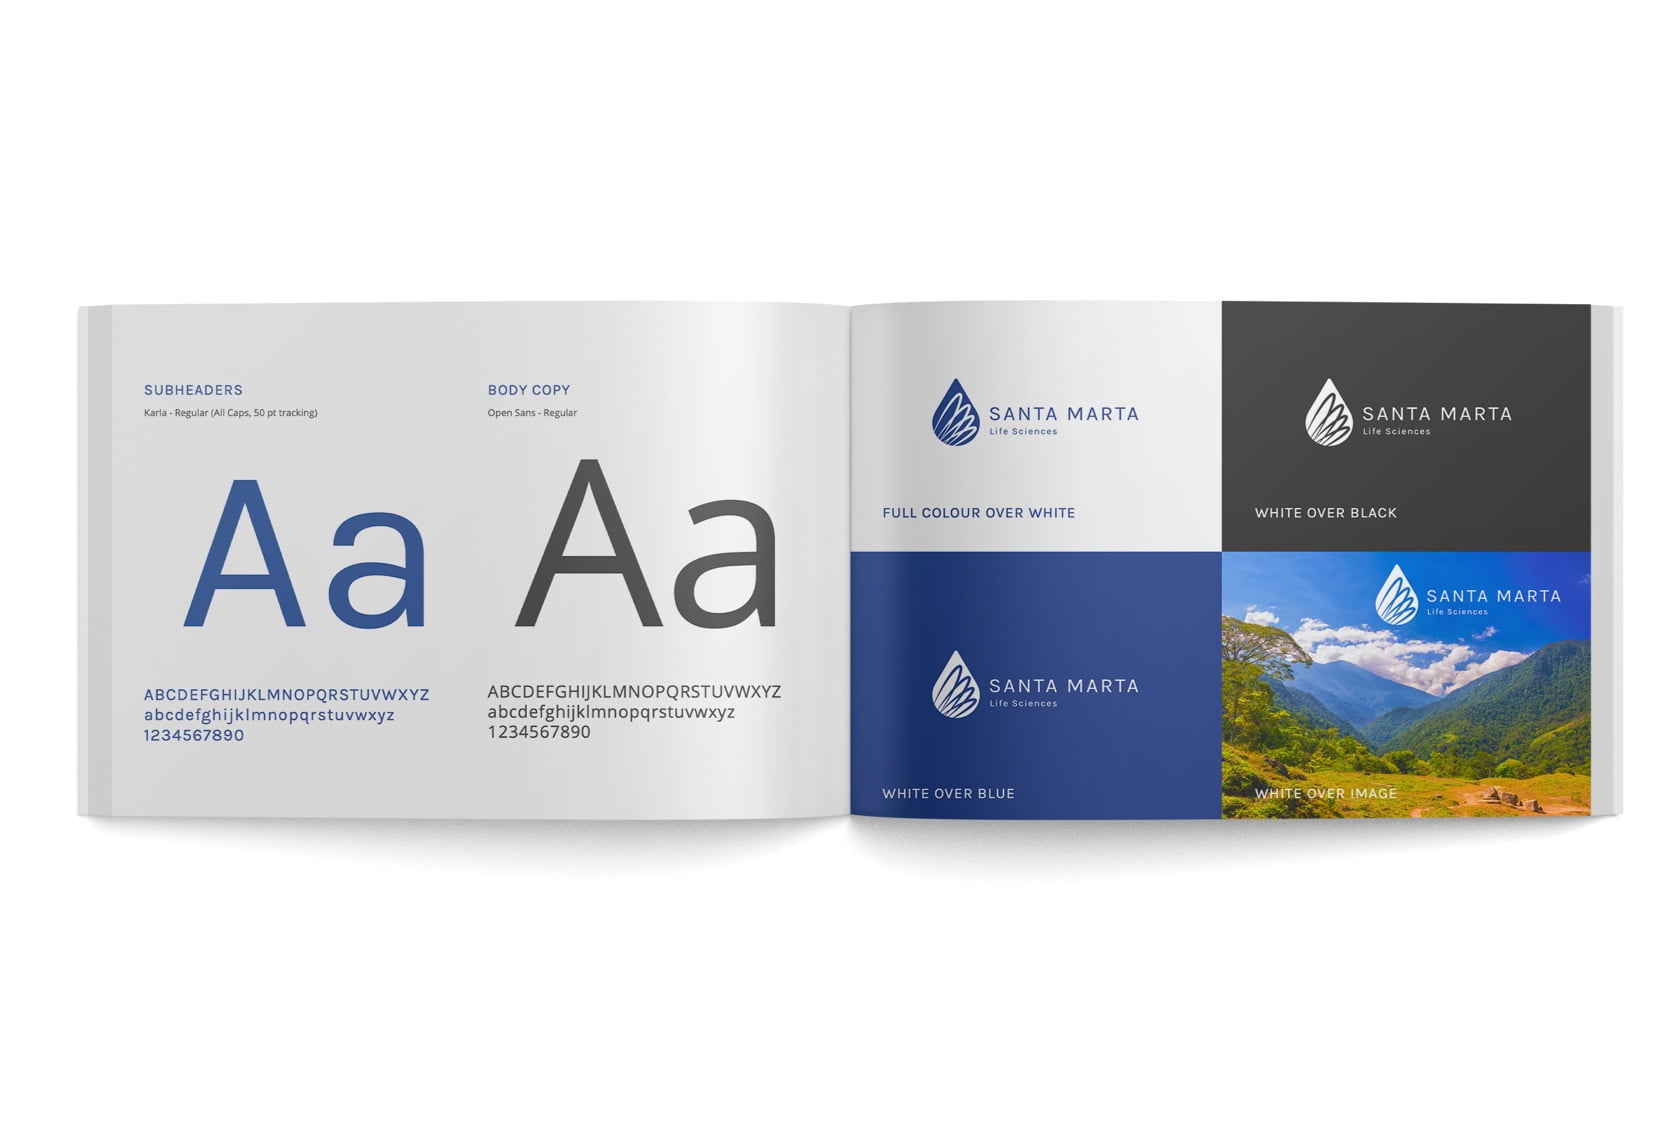 Full brand guideline with font and colour schemes to accompany the newly designed logo